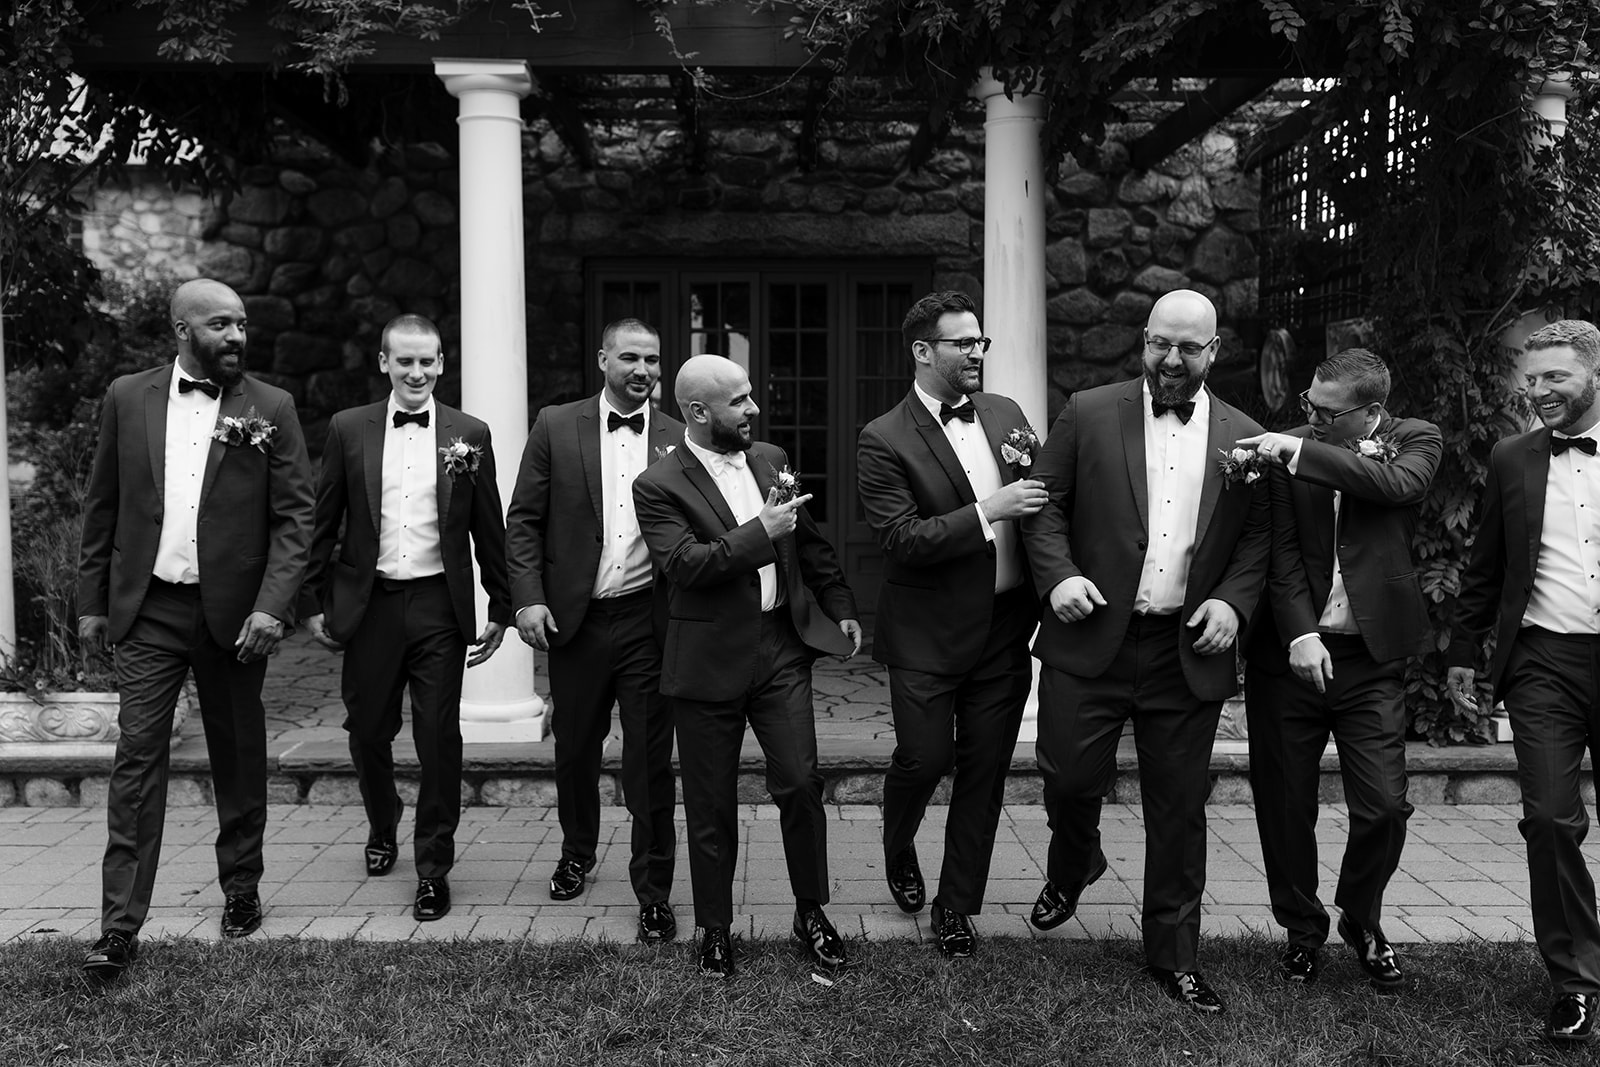 groom and groomsmen pose together sharing a laugh